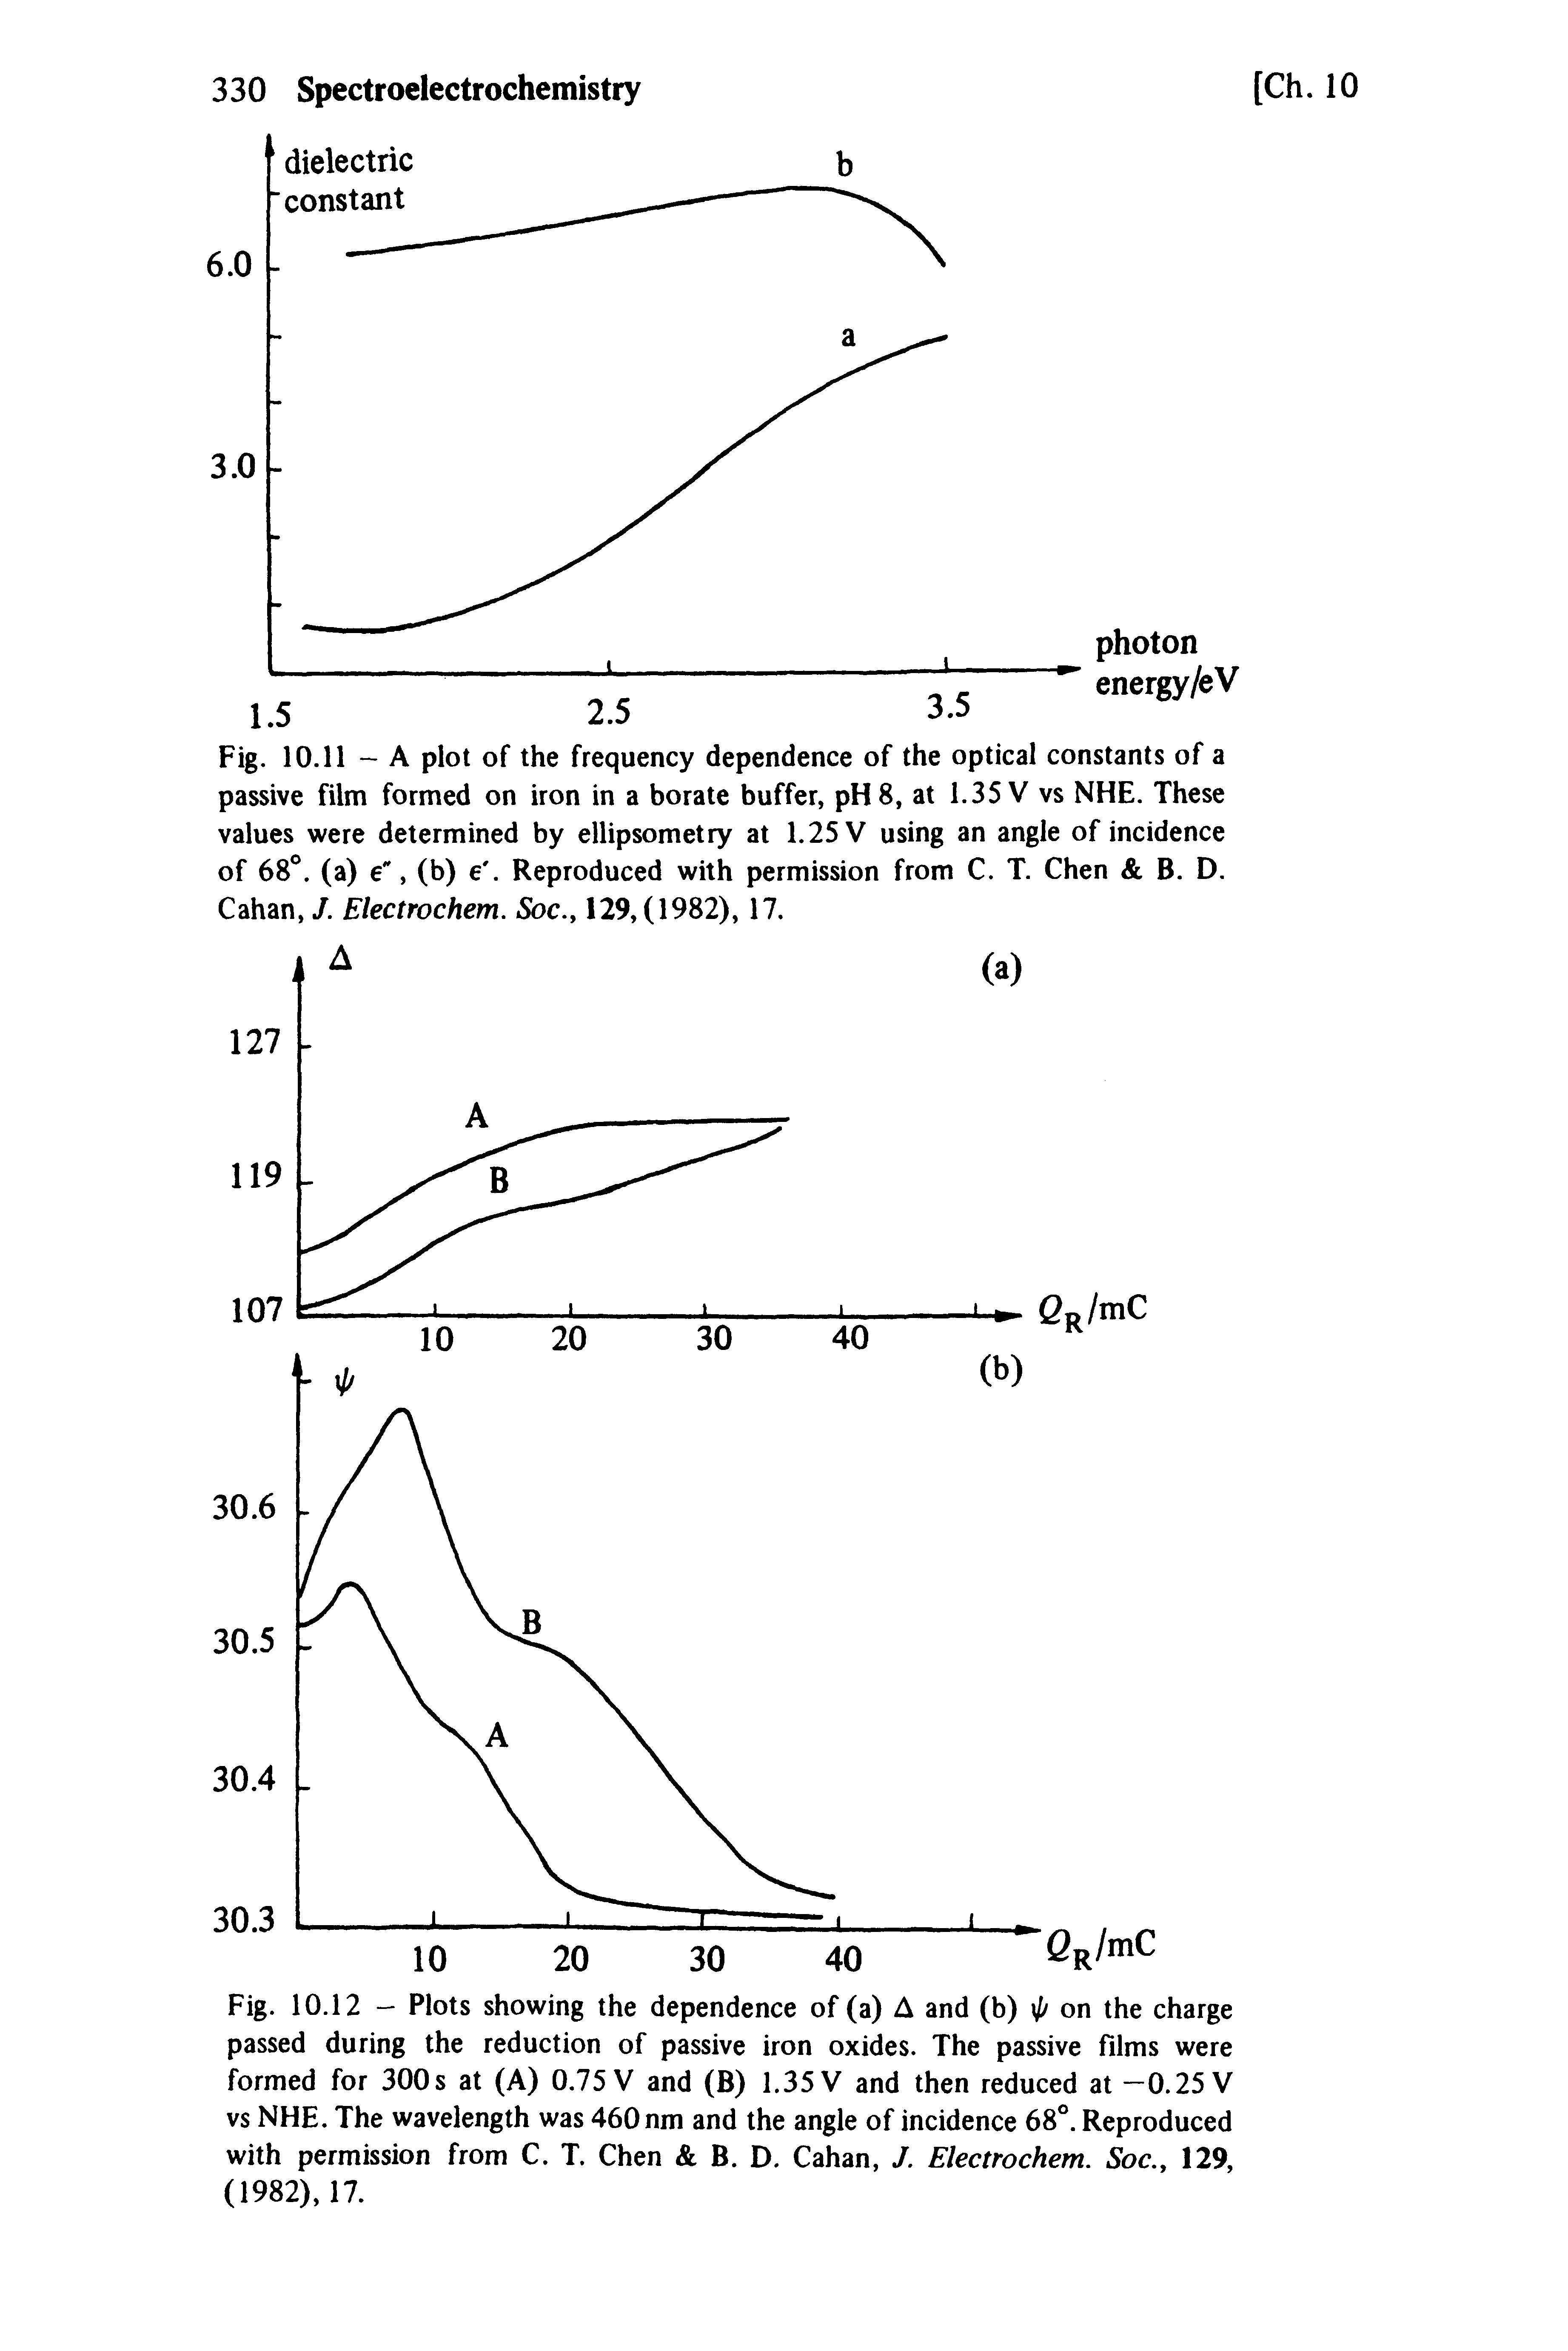 Fig. 10.12 - Plots showing the dependence of (a) A and (b) Ij on the charge passed during the reduction of passive iron oxides. The passive films were formed for 300 s at (A) 0.75 V and (B) 1.35 V and then reduced at —0.25 V vs NHE. The wavelength was 460 nm and the angle of incidence 68°. Reproduced with permission from C. T. Chen B. D. Cahan, J. Electrochem. Soc., 129, (1982), 17.